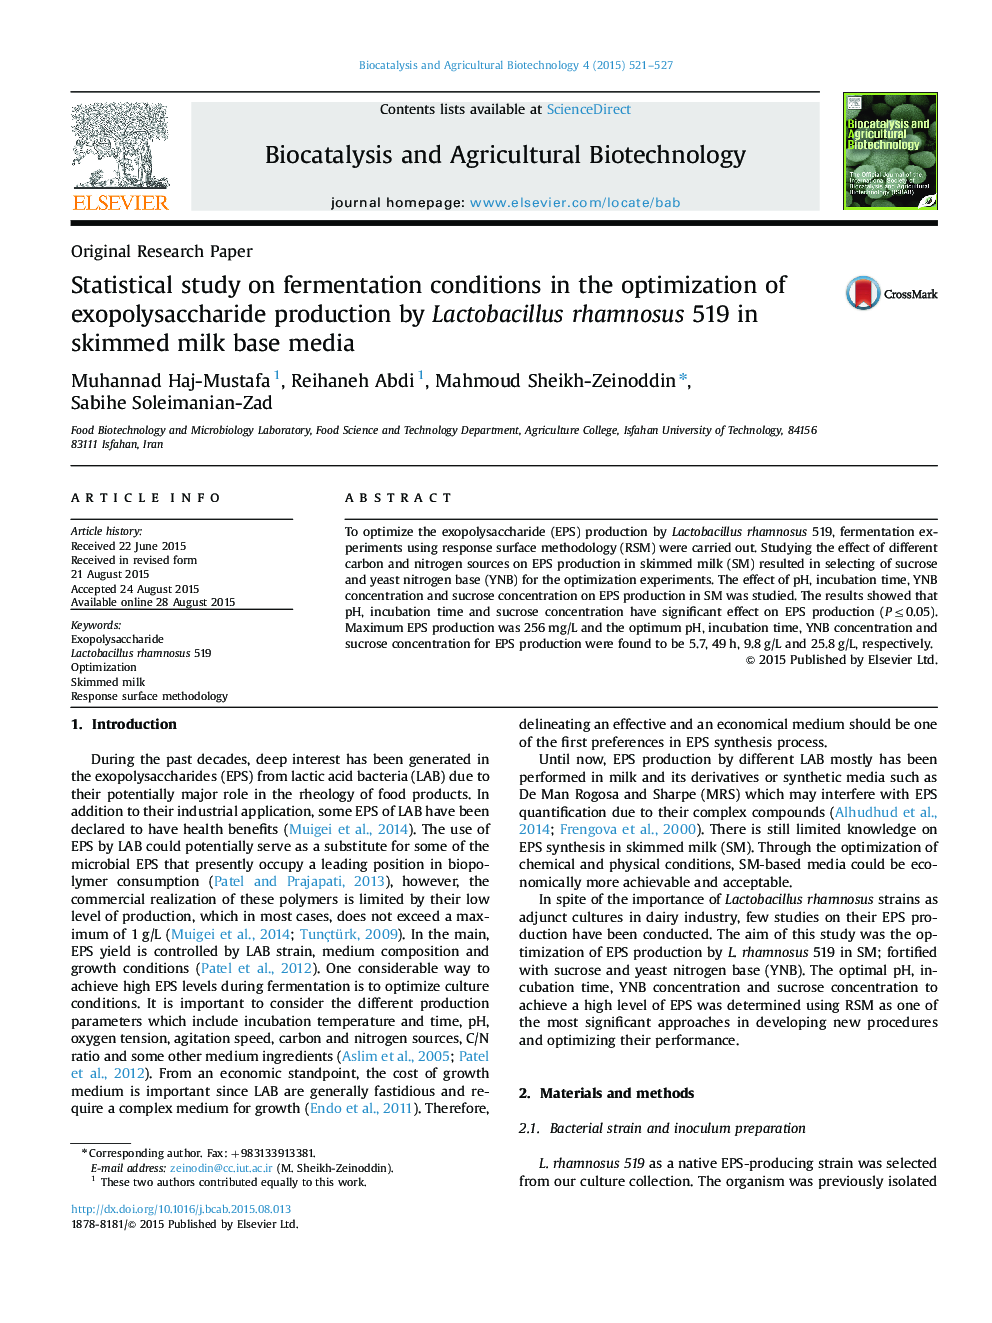 Statistical study on fermentation conditions in the optimization of exopolysaccharide production by Lactobacillus rhamnosus 519 in skimmed milk base media